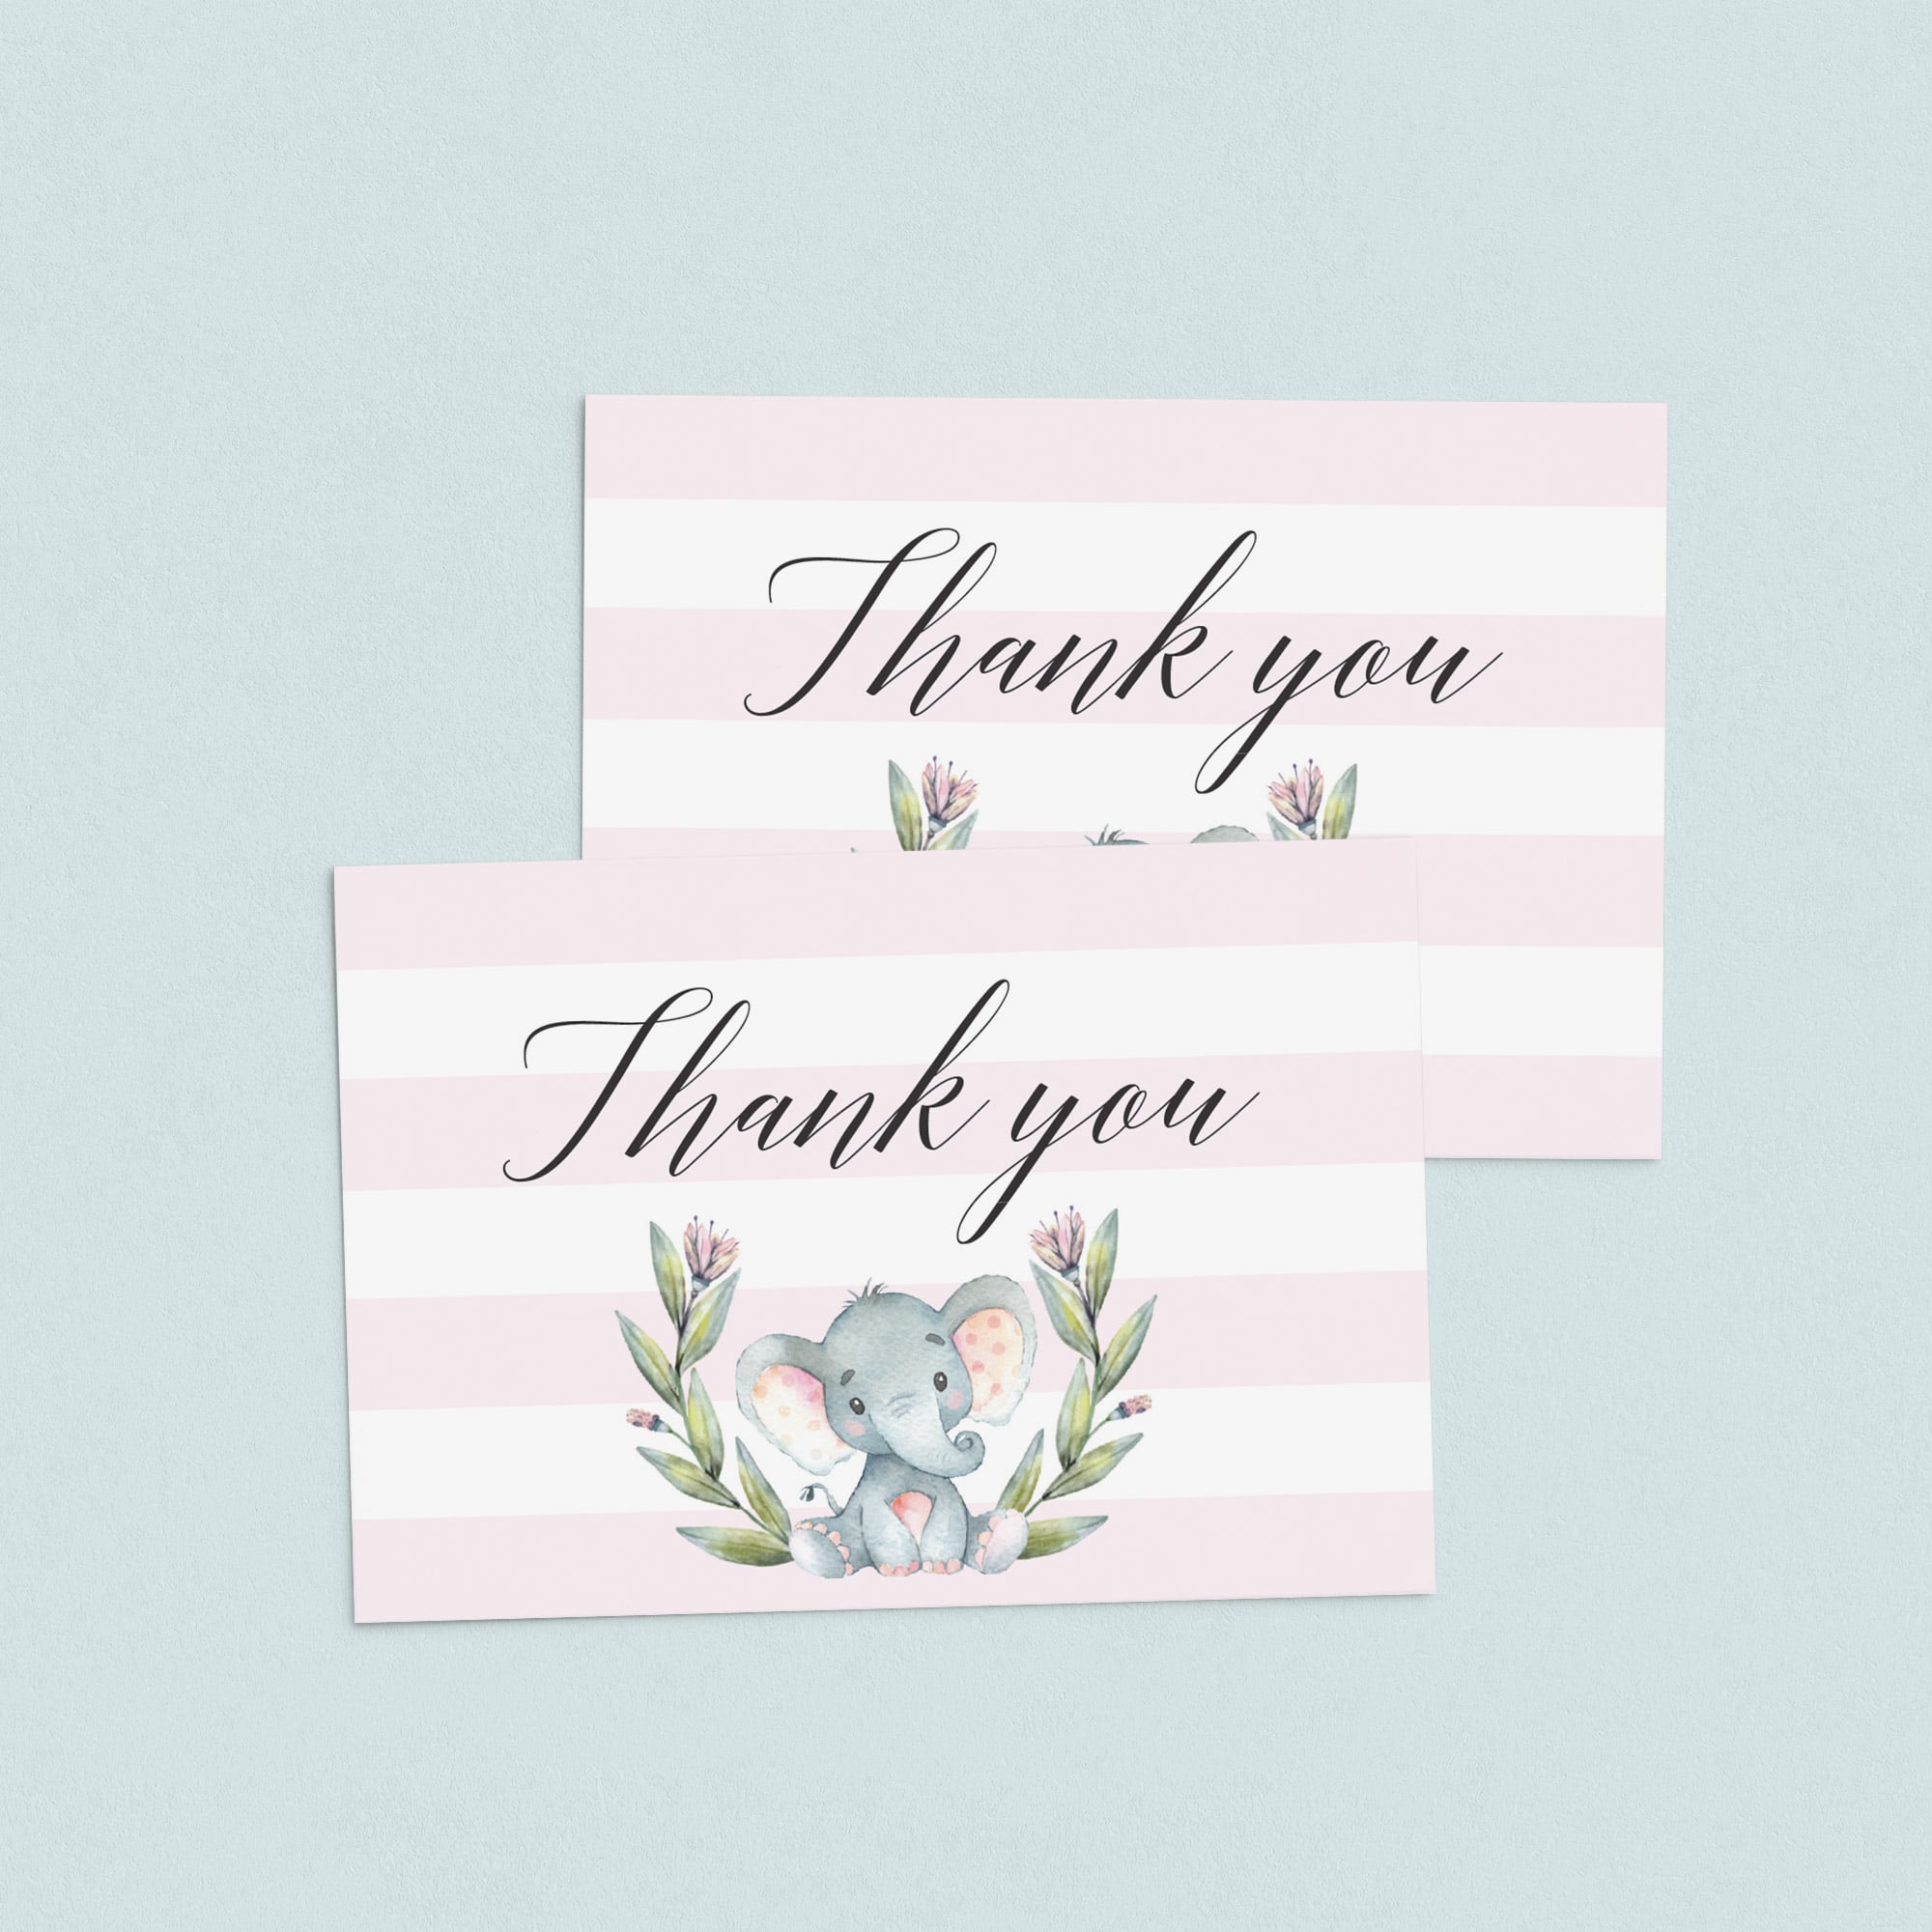 Printable thank you cards for girl baby shower by LittleSizzle